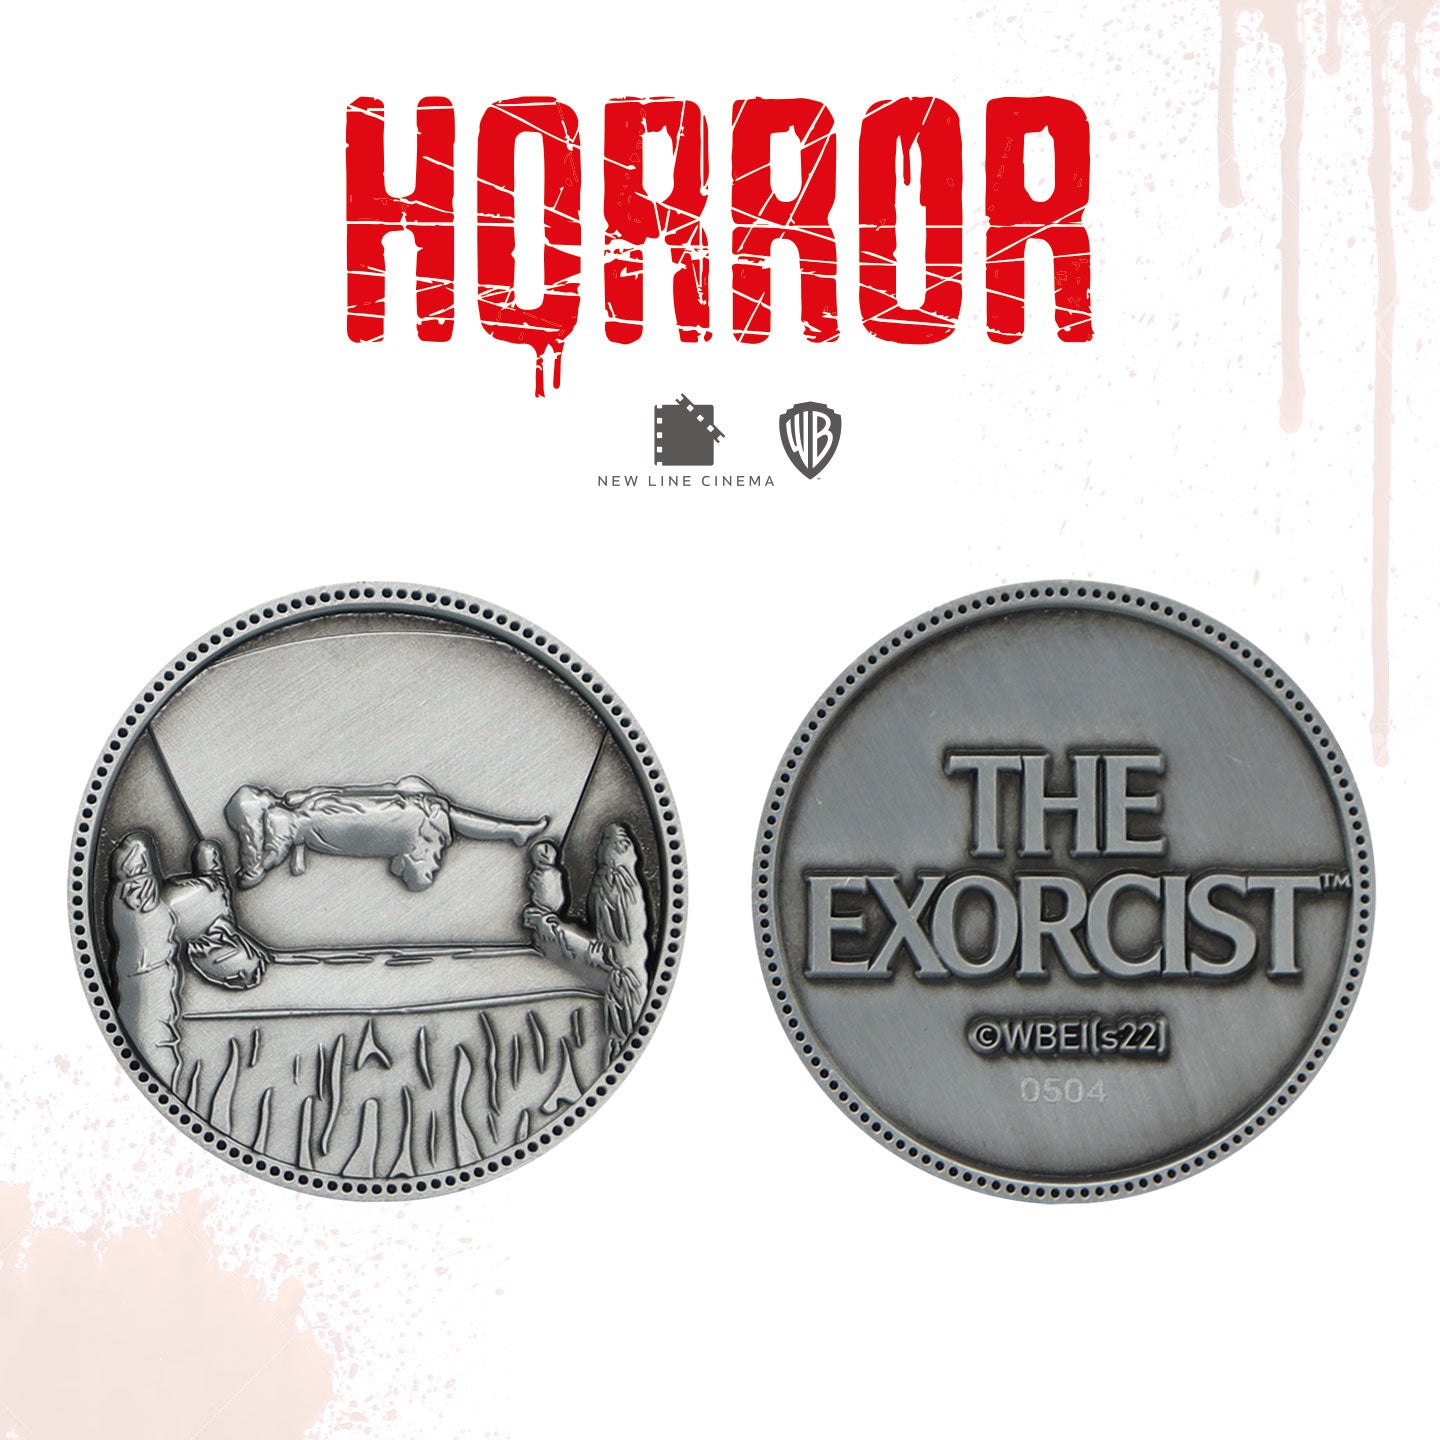 The Exorcist Limited Edition Collectible Coin